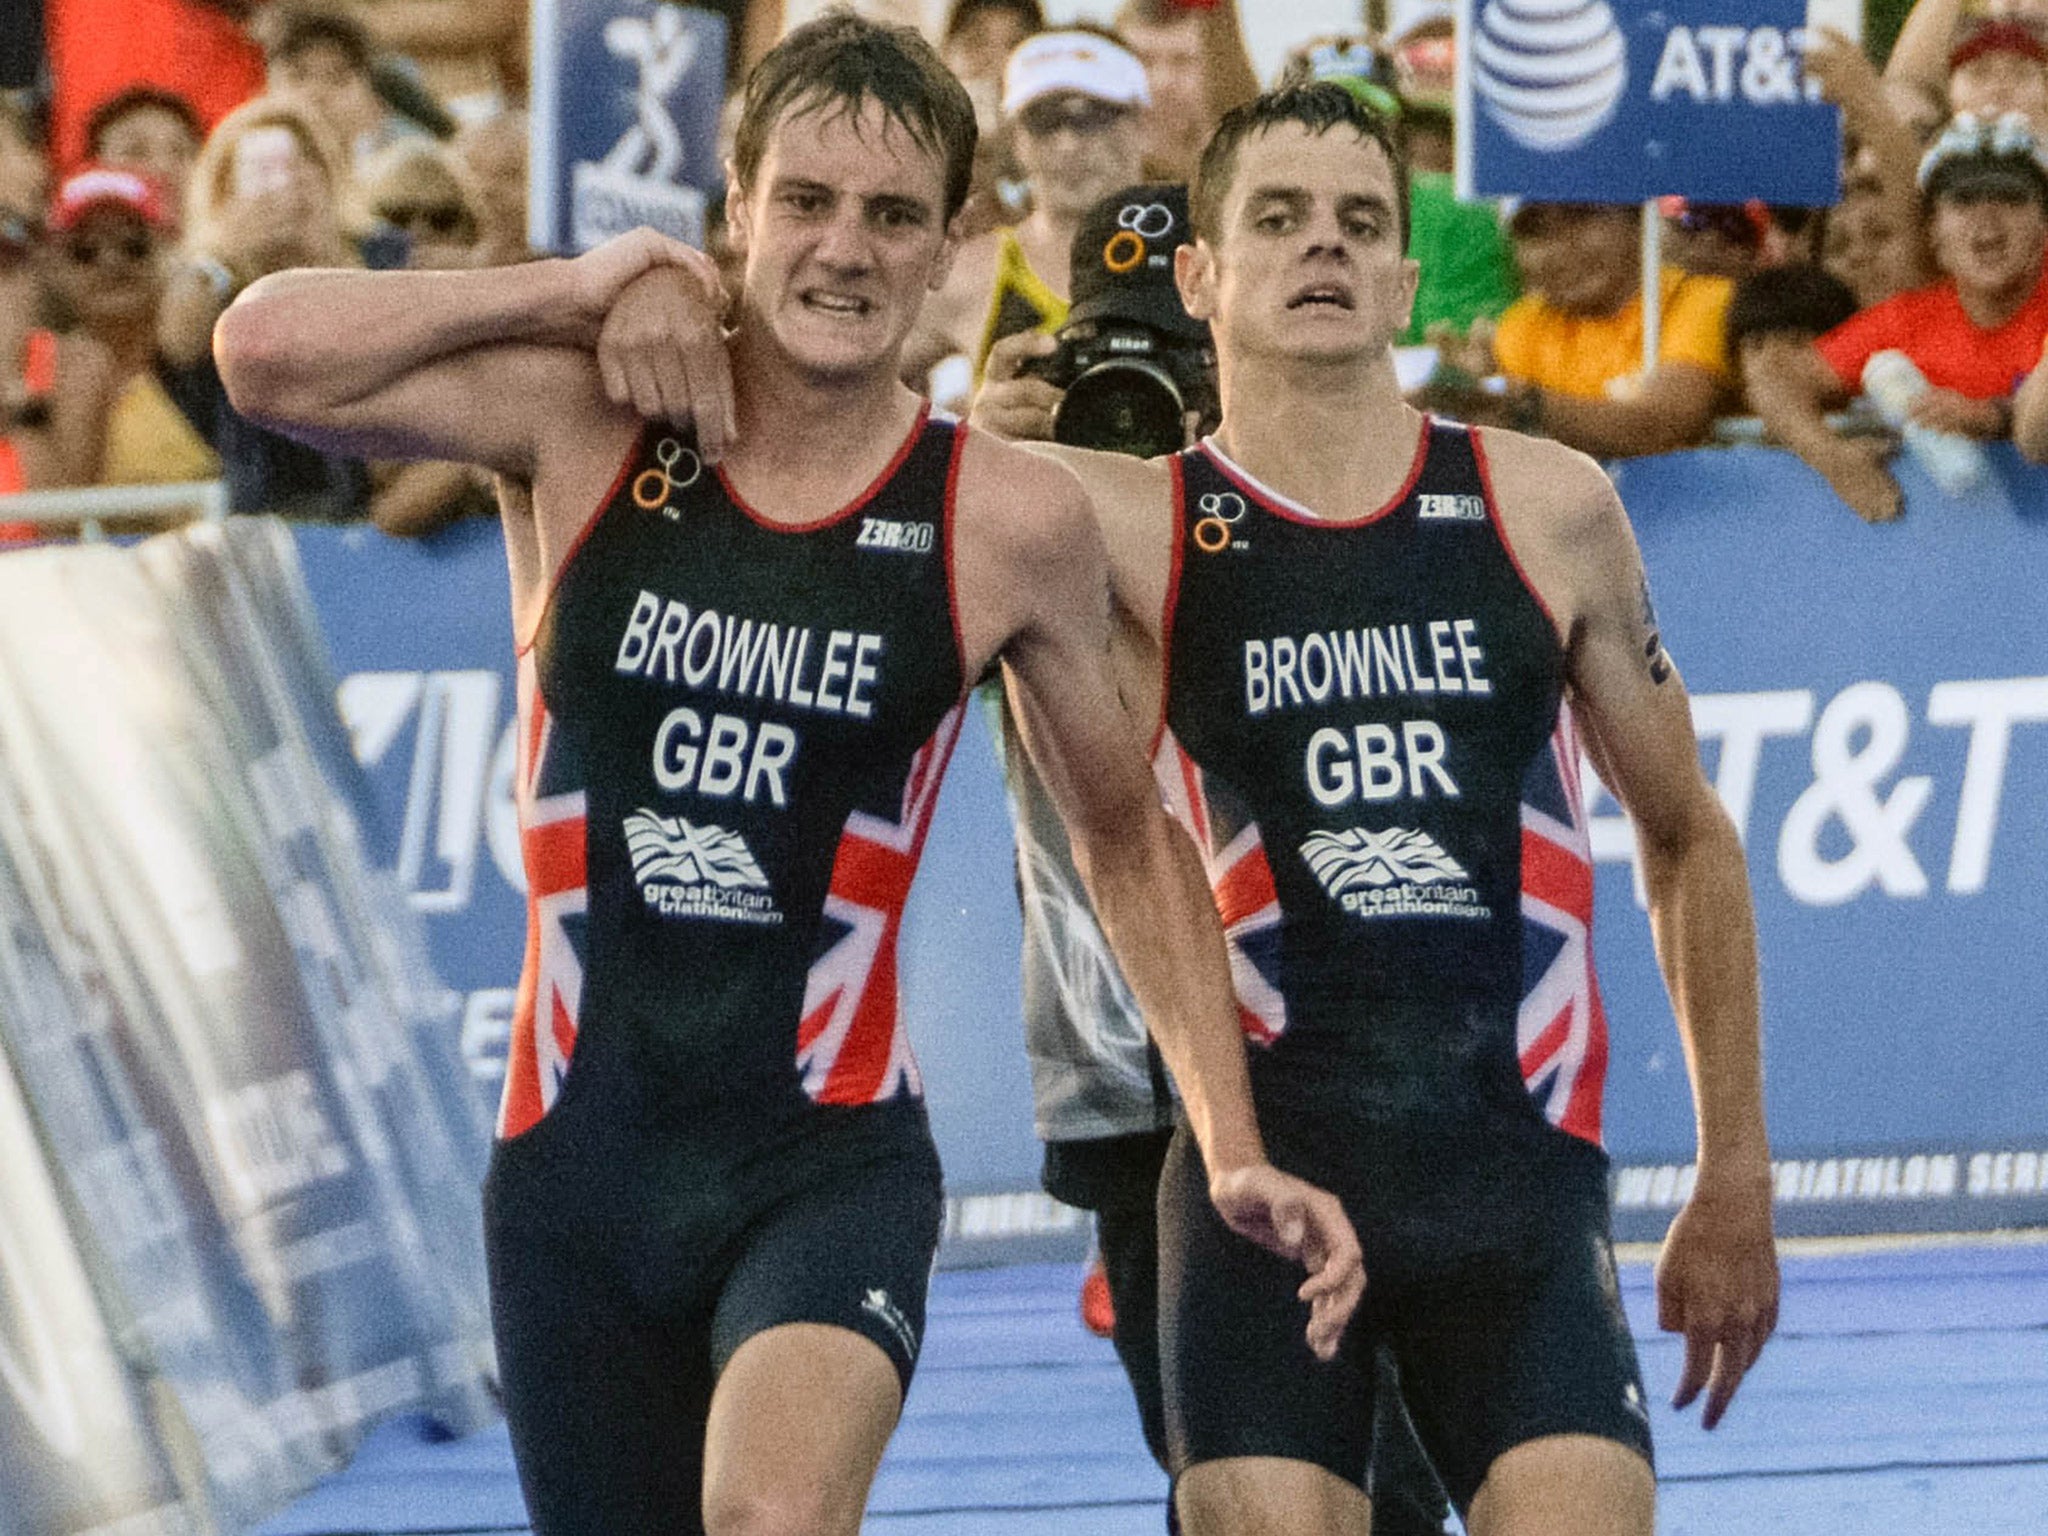 &#13;
Alistair Brownlee (left) helps his brother Jonny across the finish line &#13;